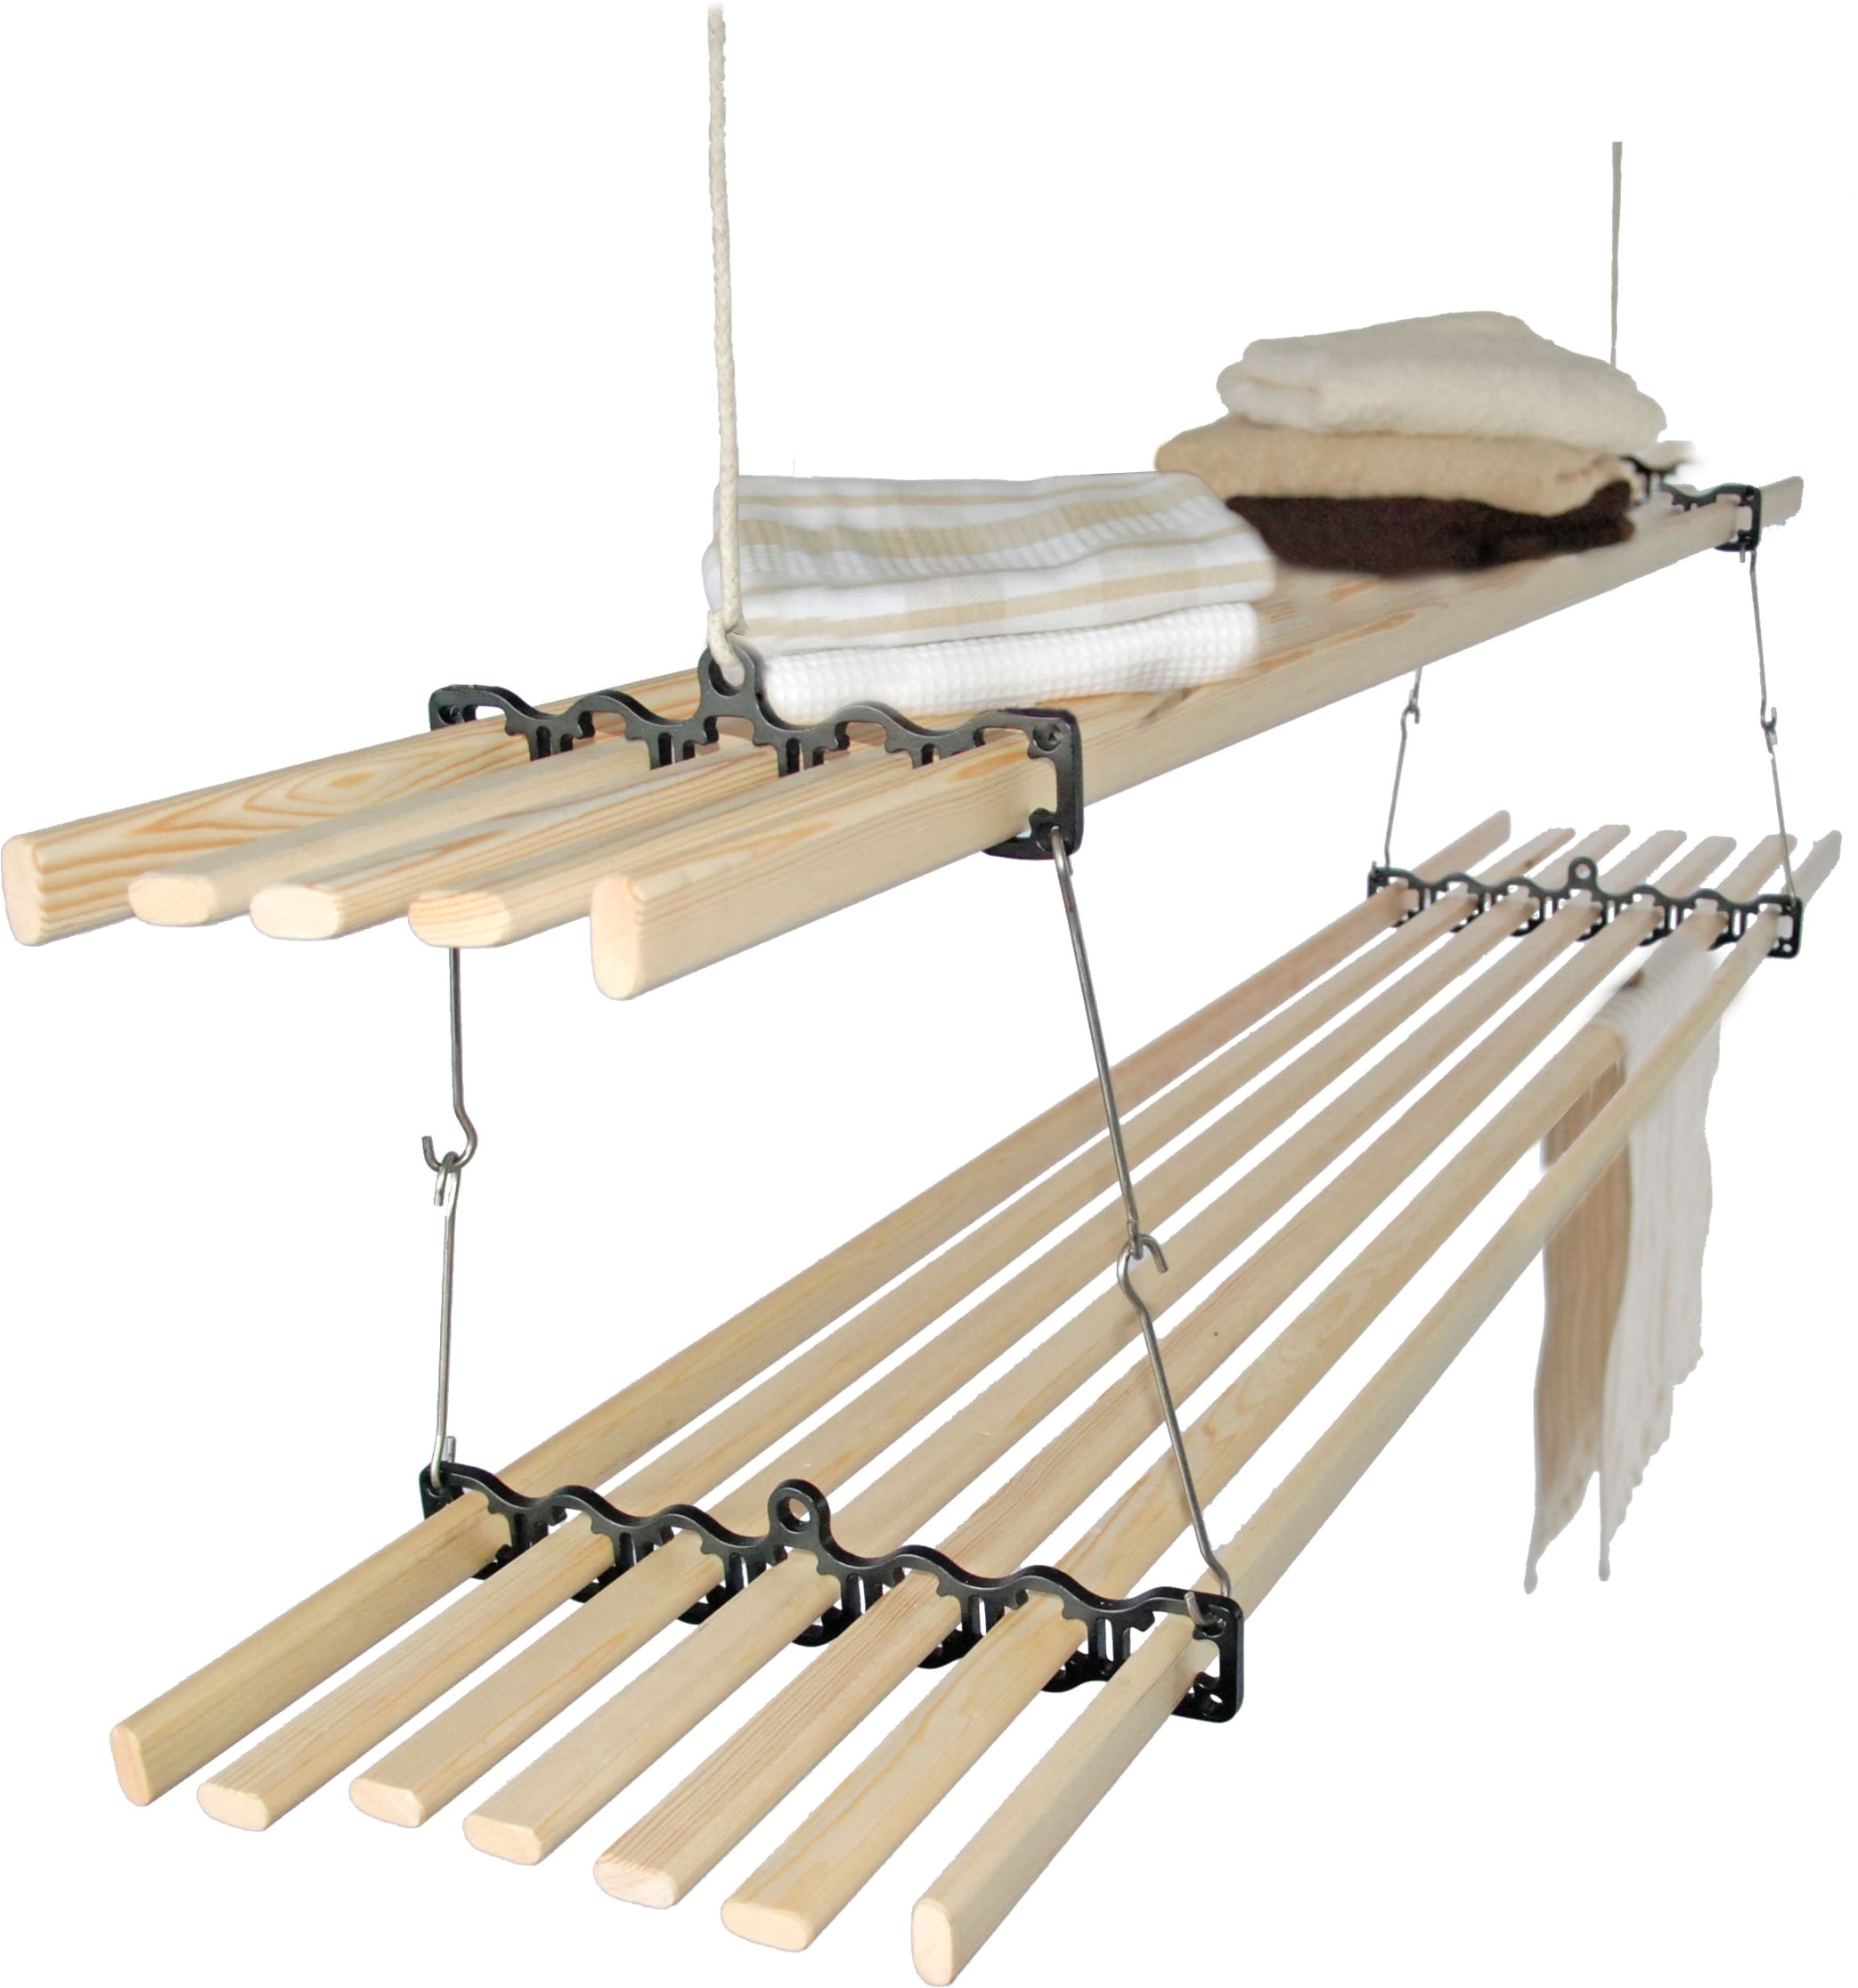 urban clothes lines cart for drying rack laundry line and clothes line orders